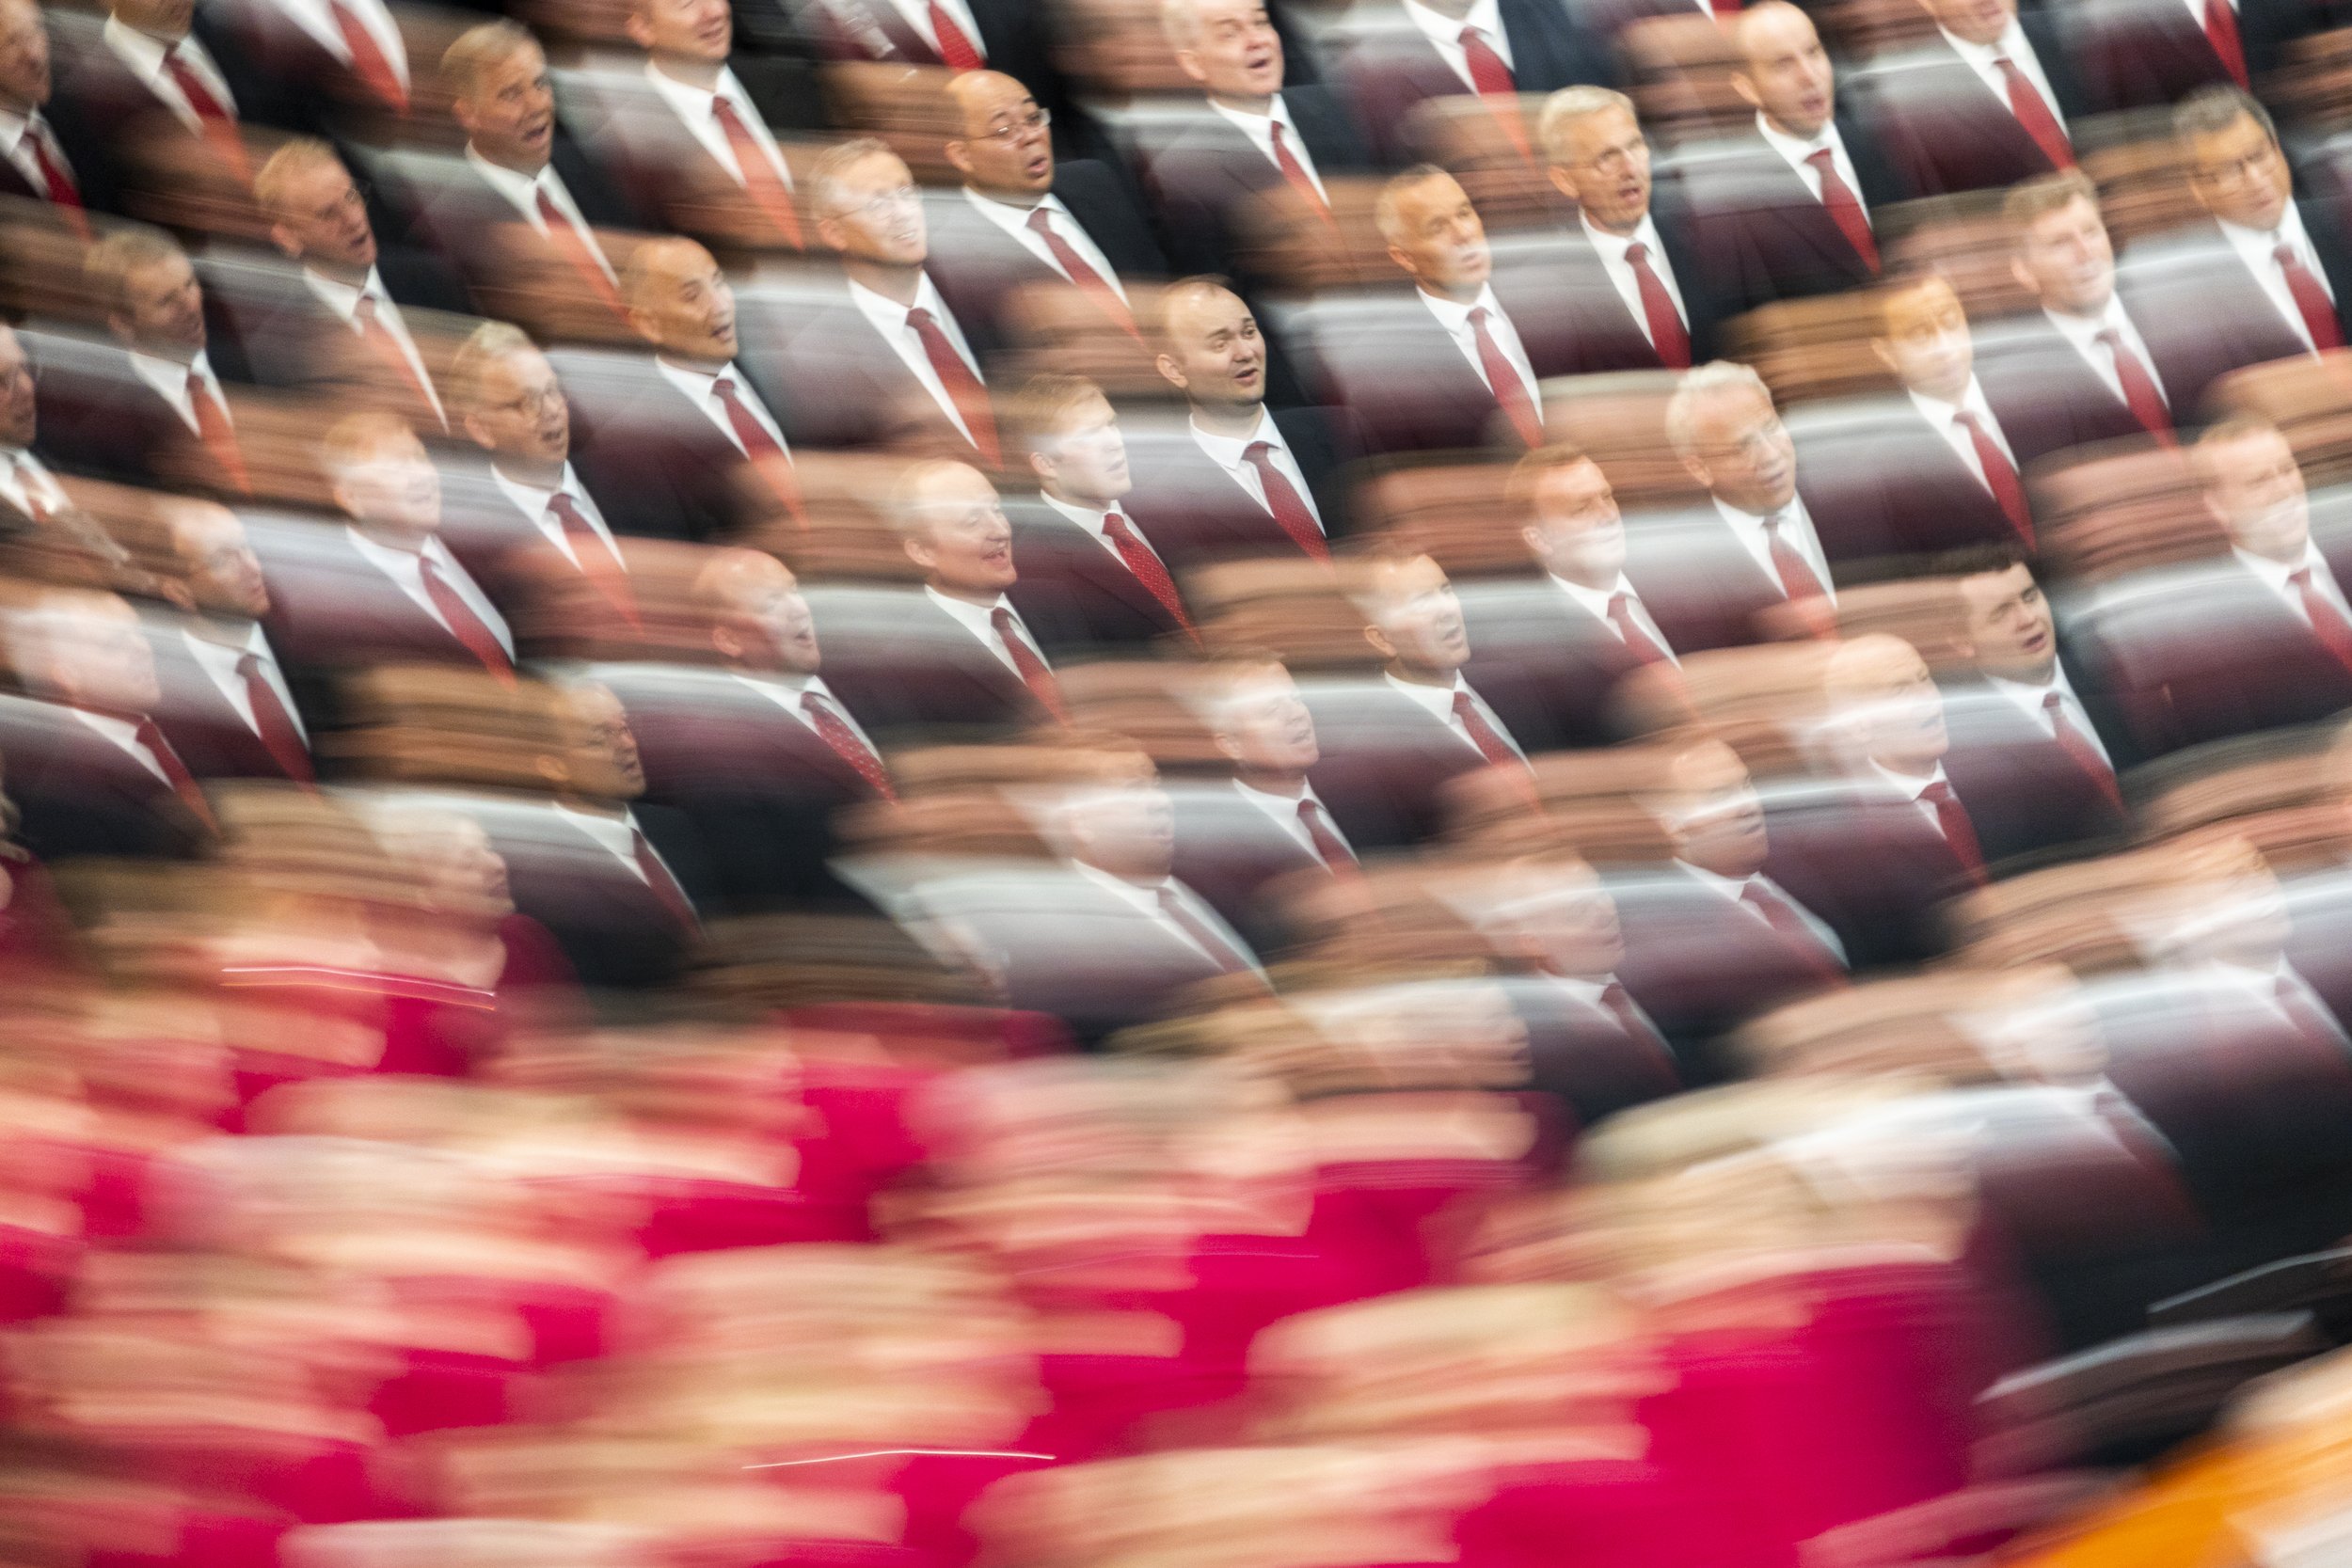  The Tabernacle Choir performs during the Sunday morning session of the 192nd Semiannual General Conference of The Church of Jesus Christ of Latter-day Saints in the Conference Center in Salt Lake City on Oct. 2, 2022. 